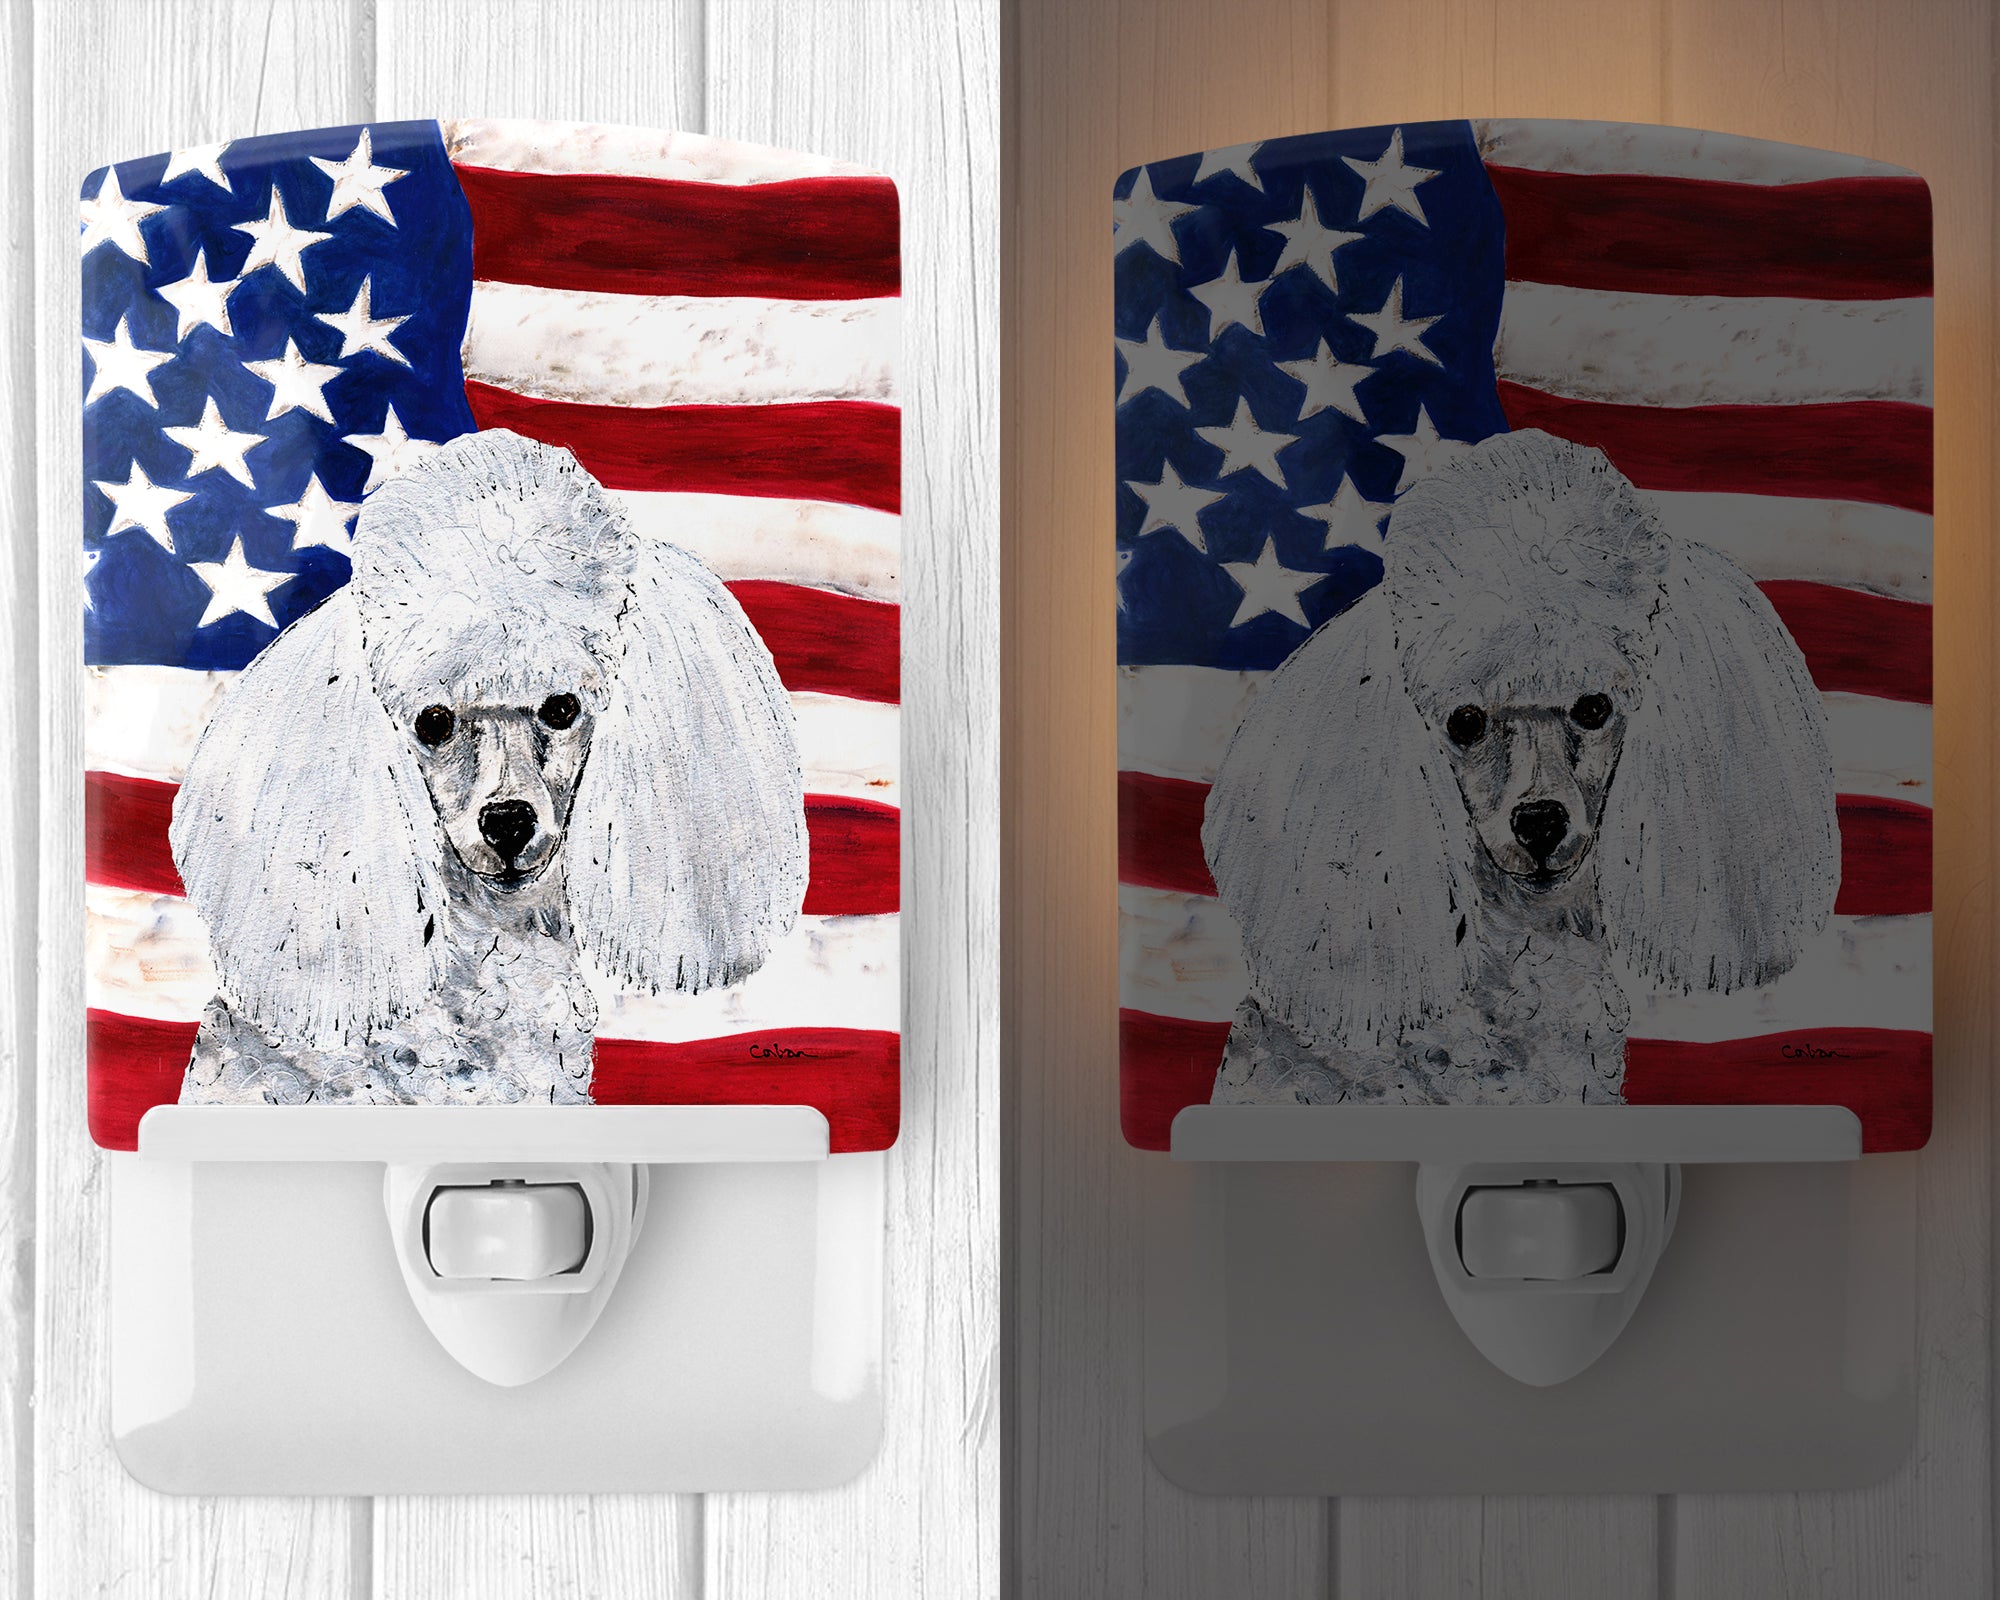 White Toy Poodle with American Flag USA Ceramic Night Light SC9629CNL - the-store.com